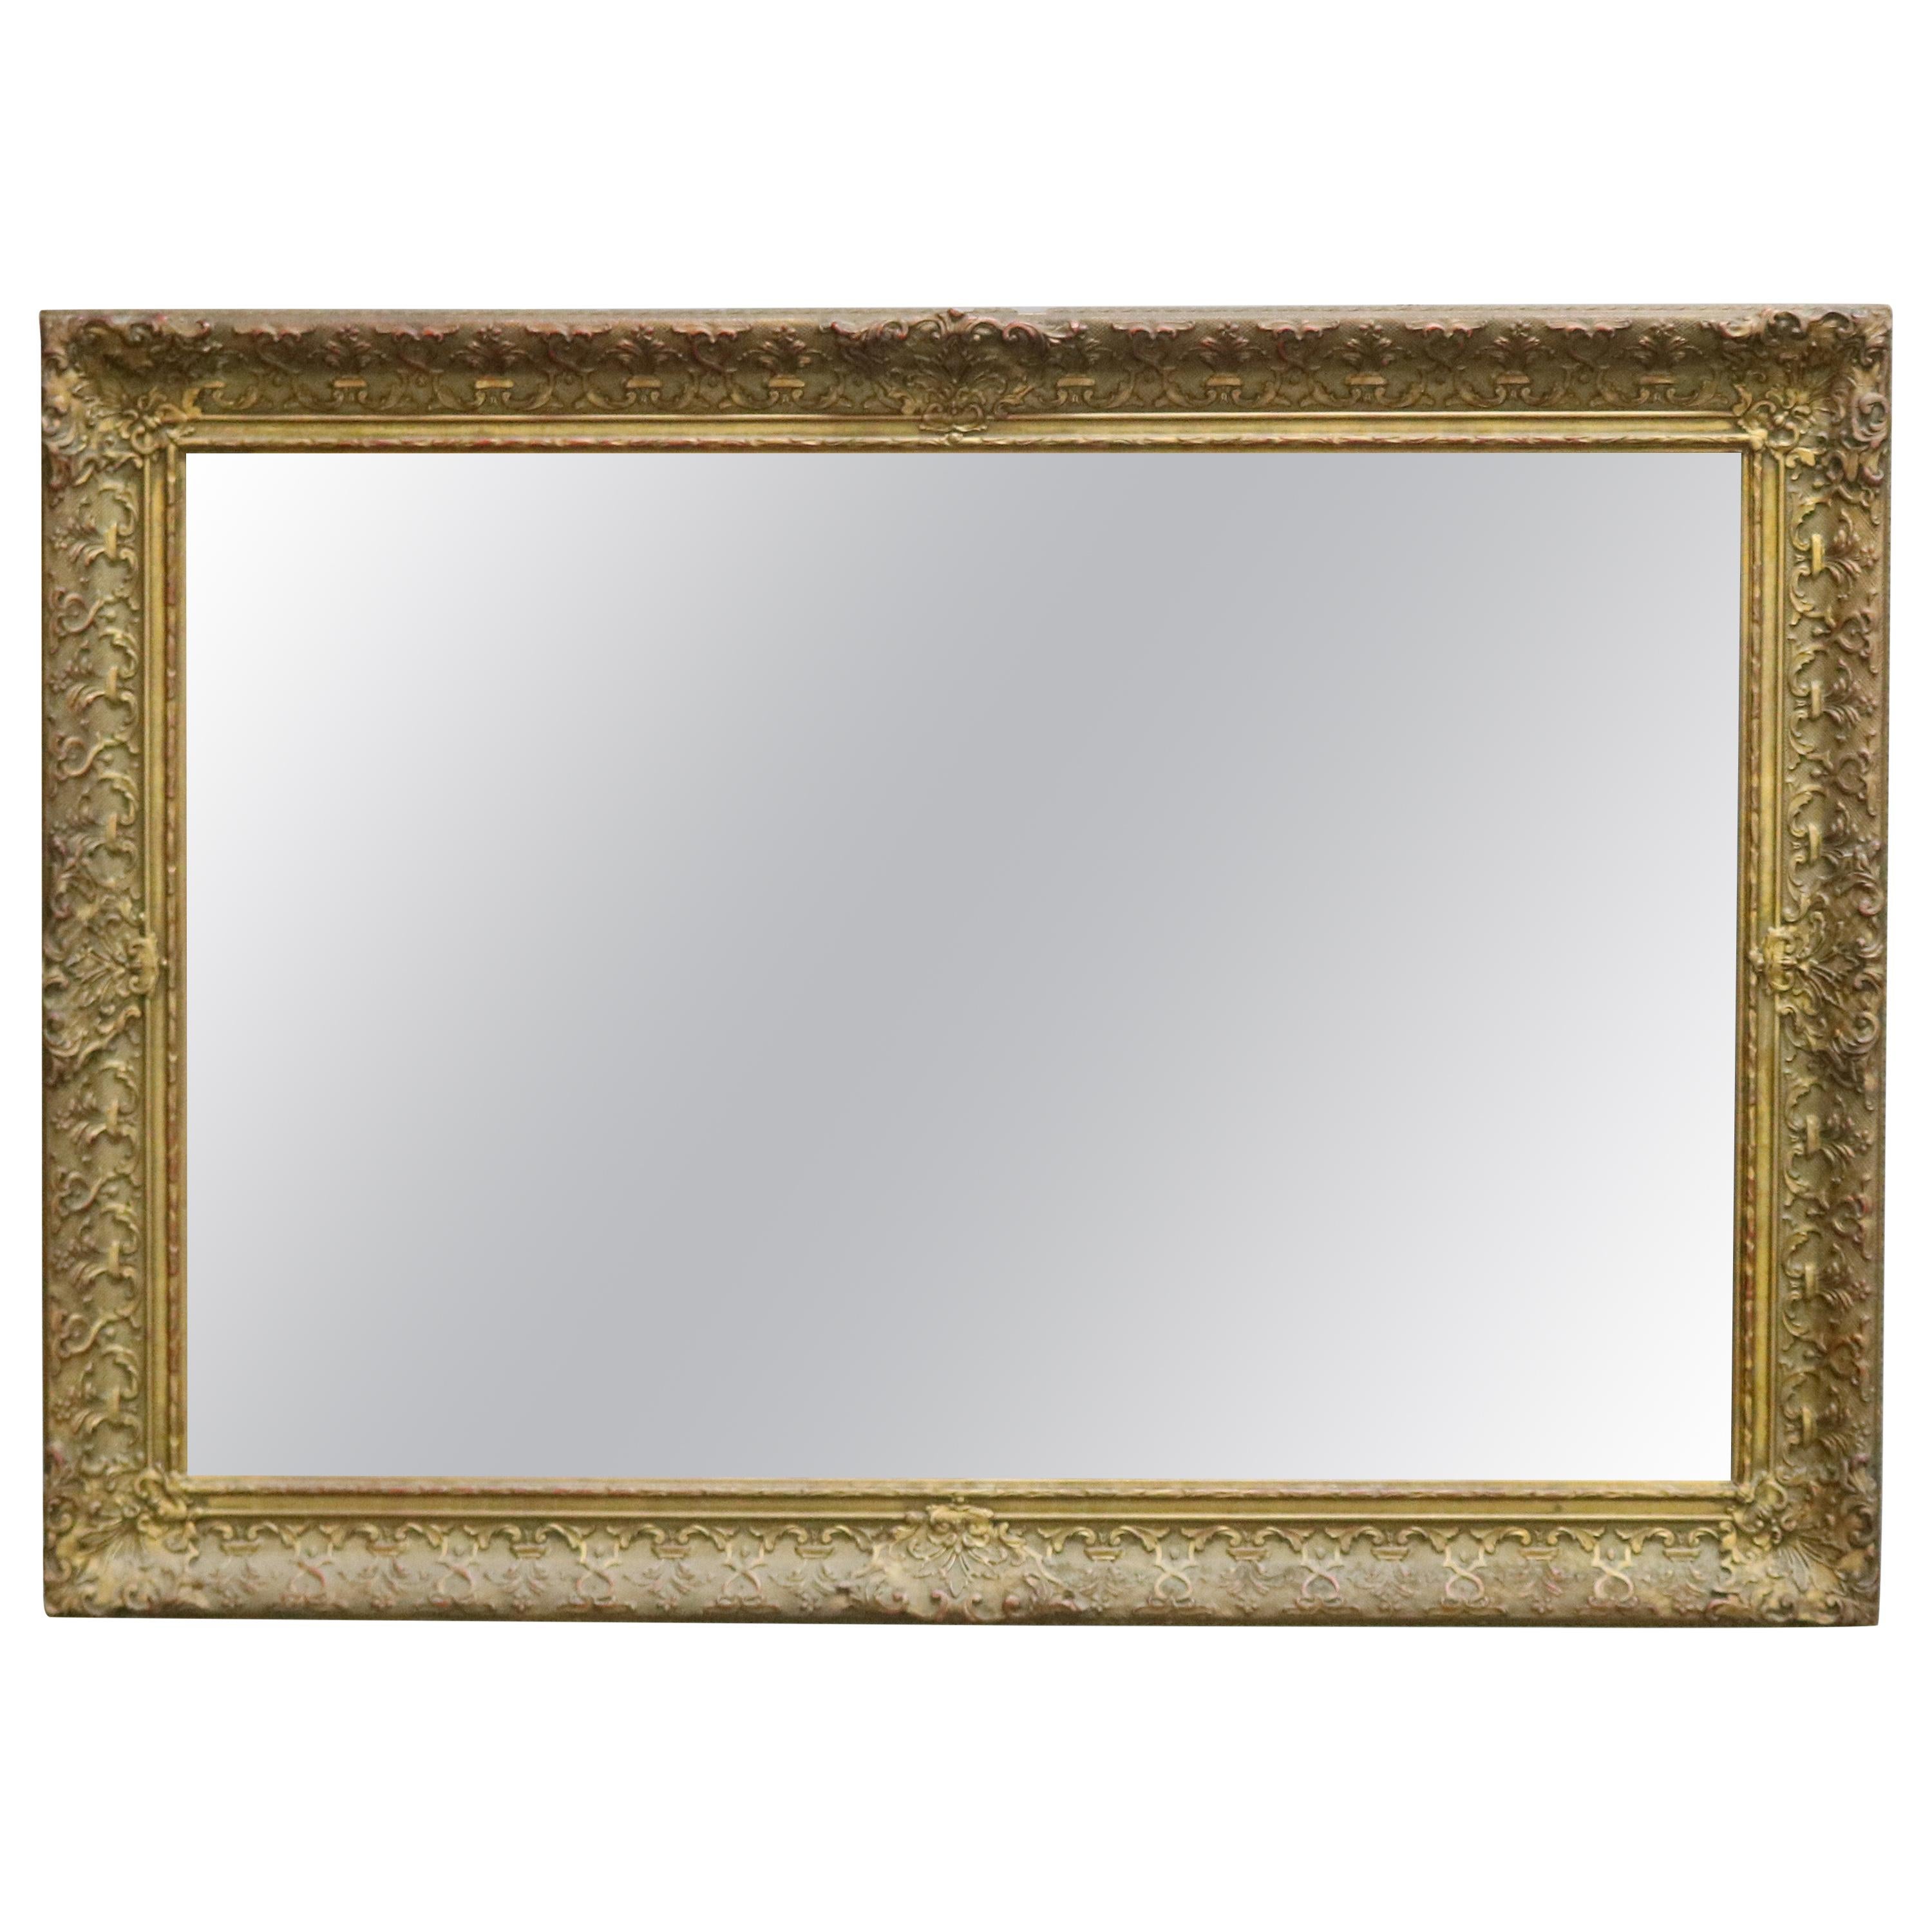 Antique Continental Scroll and Foliate Giltwood Framed Wall Mirror, circa 1900 For Sale